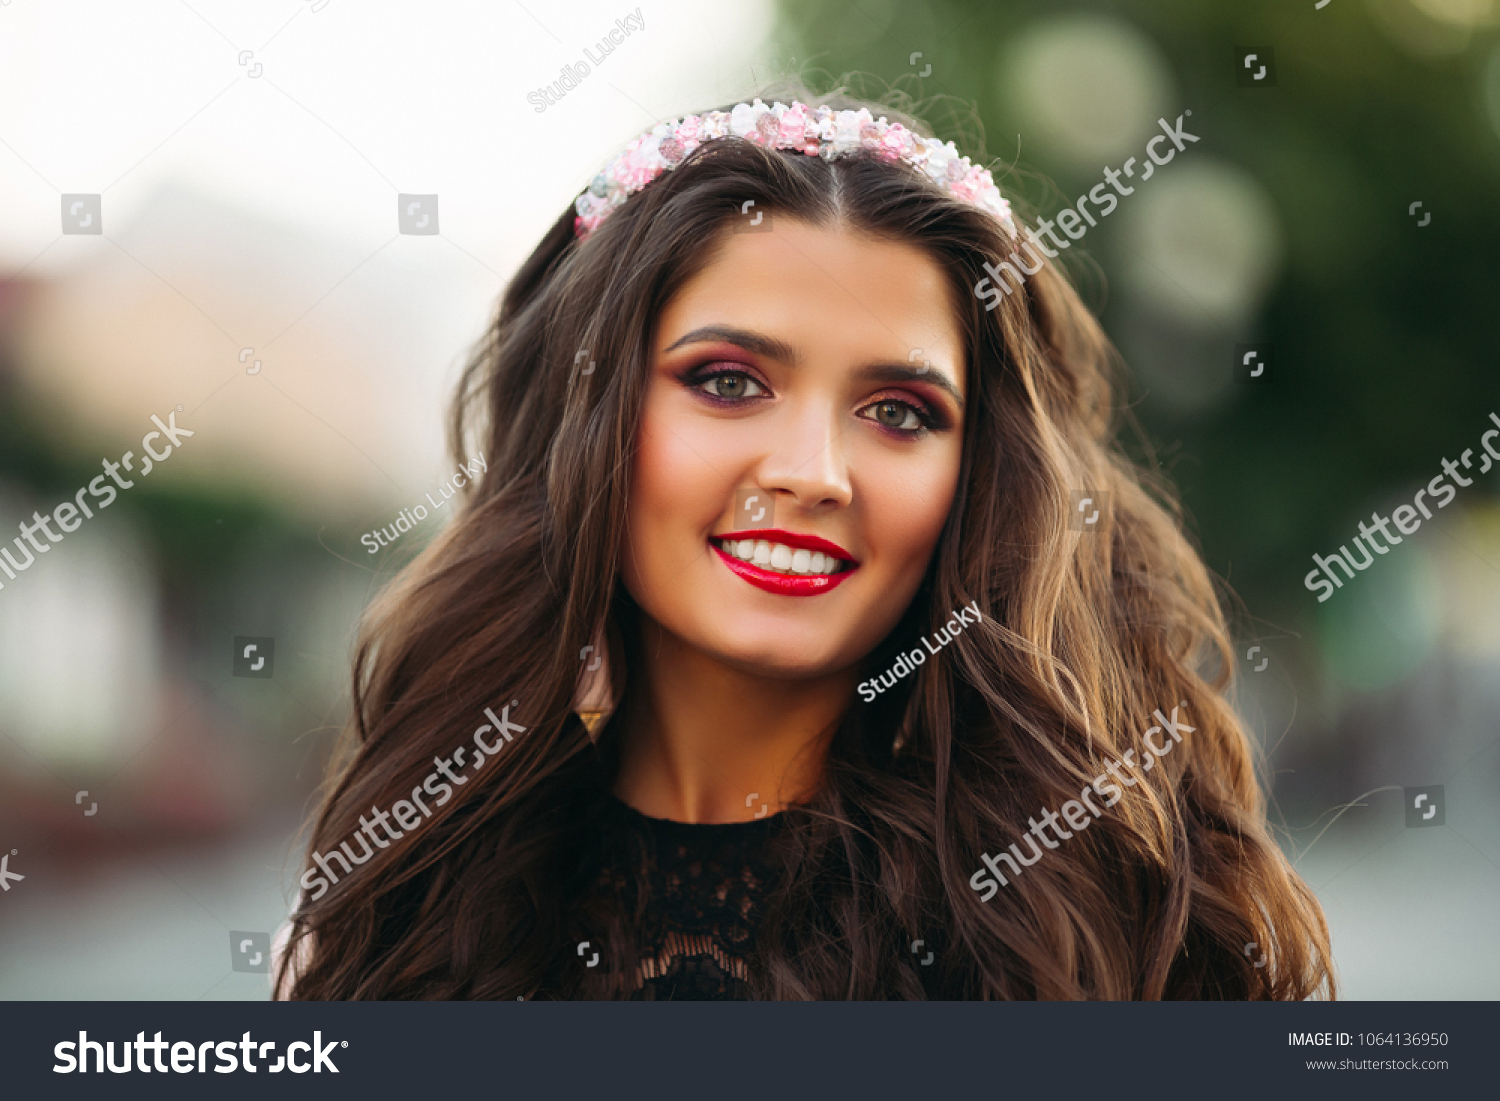 Portrait of beauty brunette with make up wearing flower diadem smiling at camera over blurred background. #1064136950